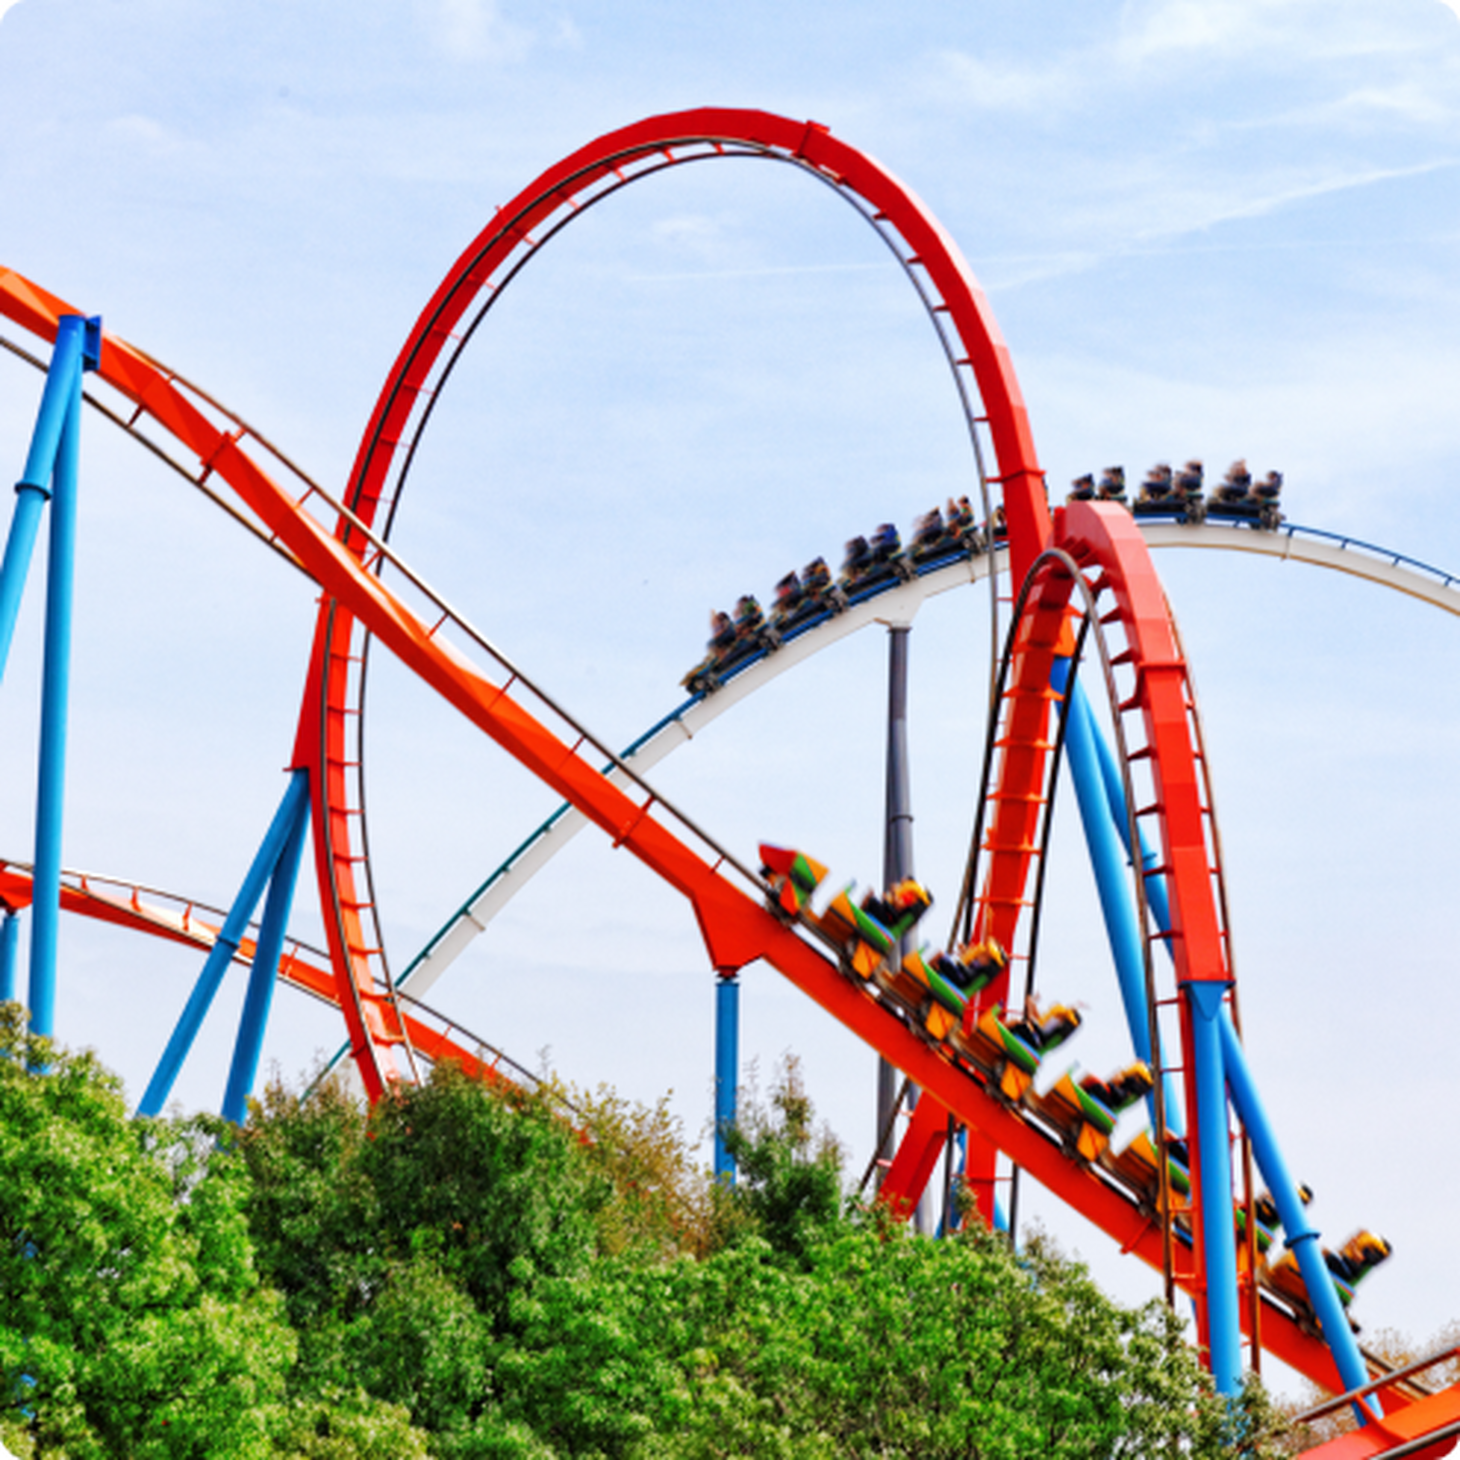 Six Flags rollercoaster ride